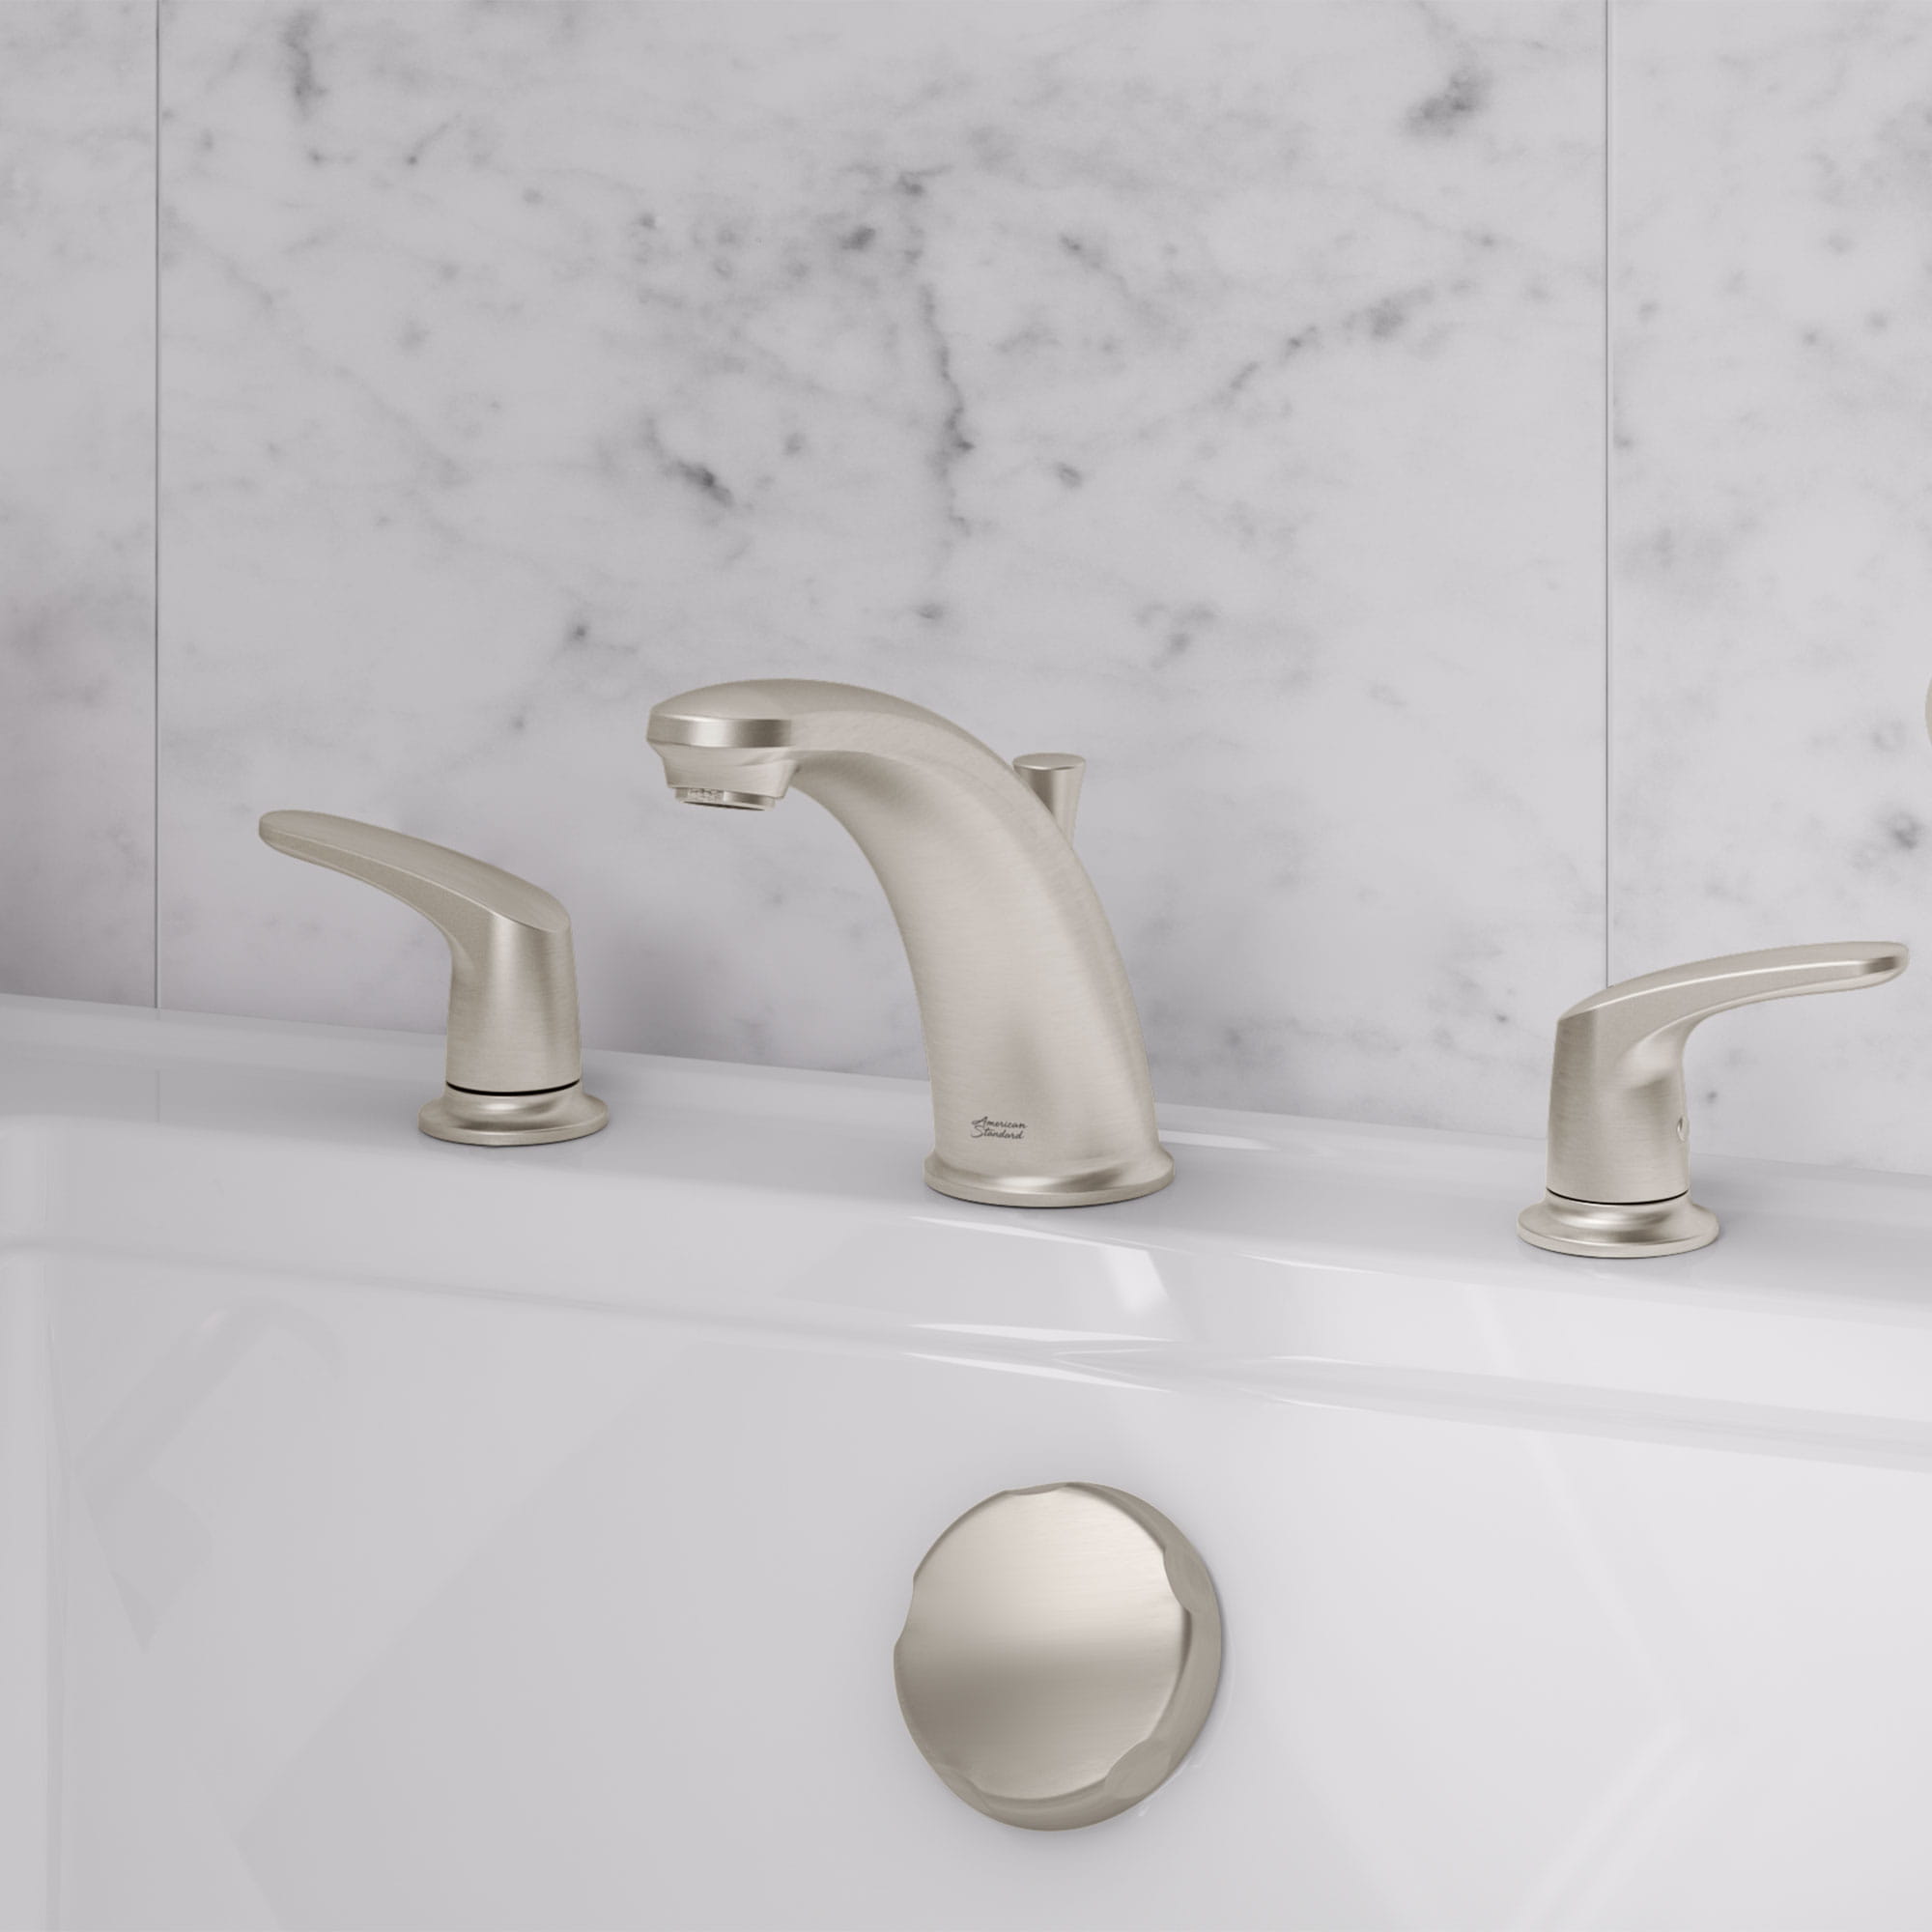 Colony PRO Bathtub Faucet Trim With Lever Handles for Flash Rough In Valve   BRUSHED NICKEL